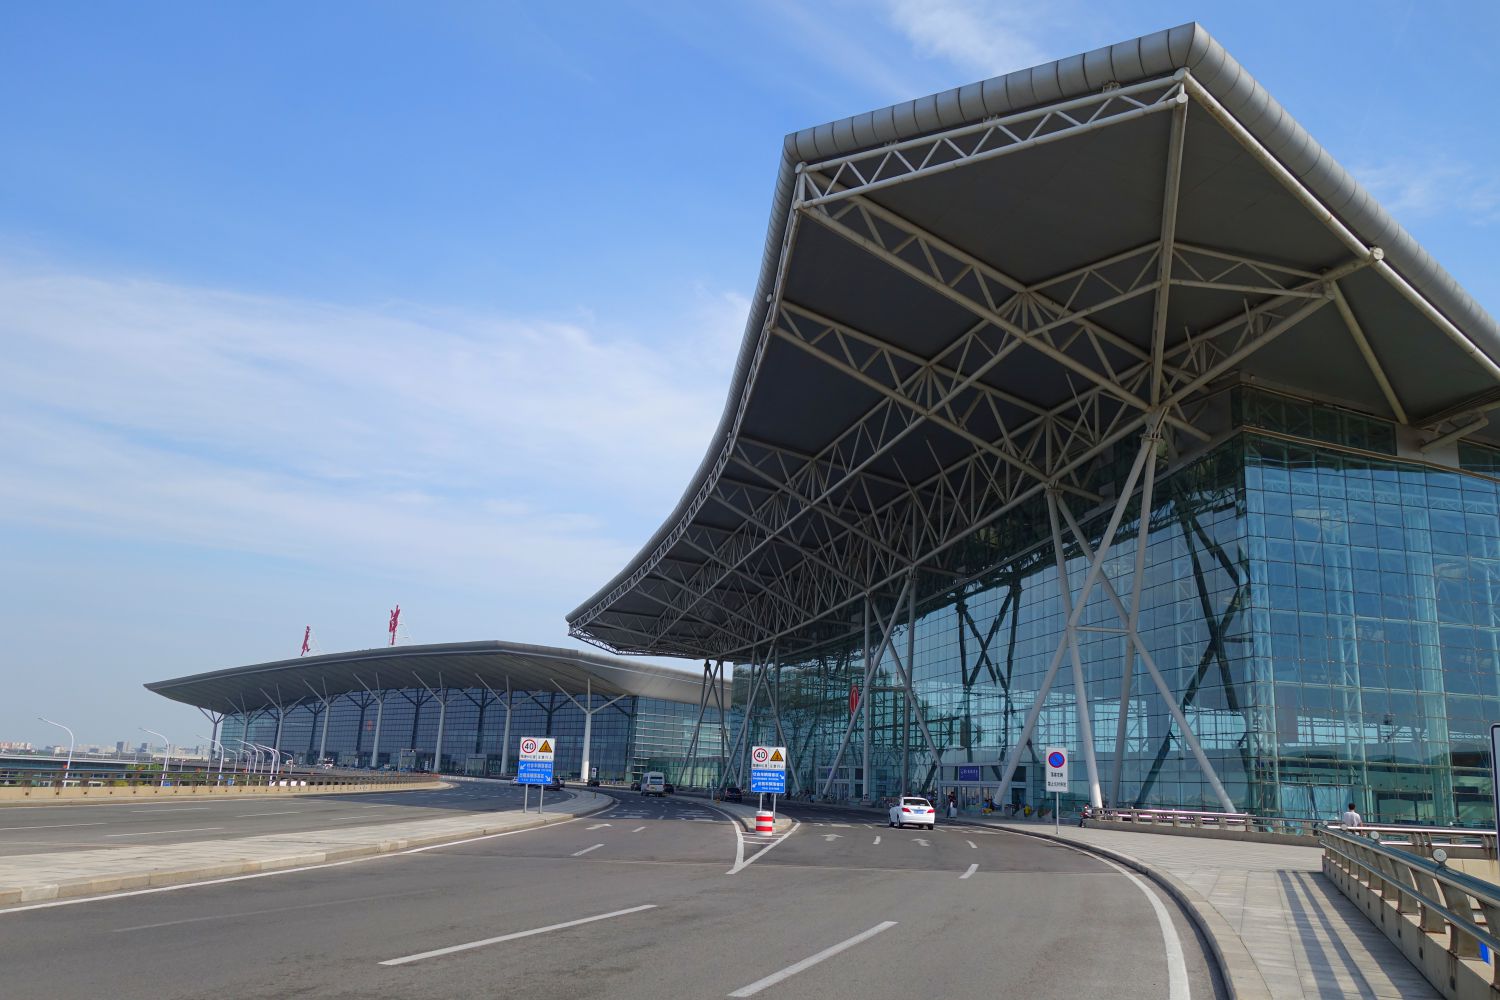 Tianjin International Airport is a hub for Okay Airways and Tianjin Airlines.